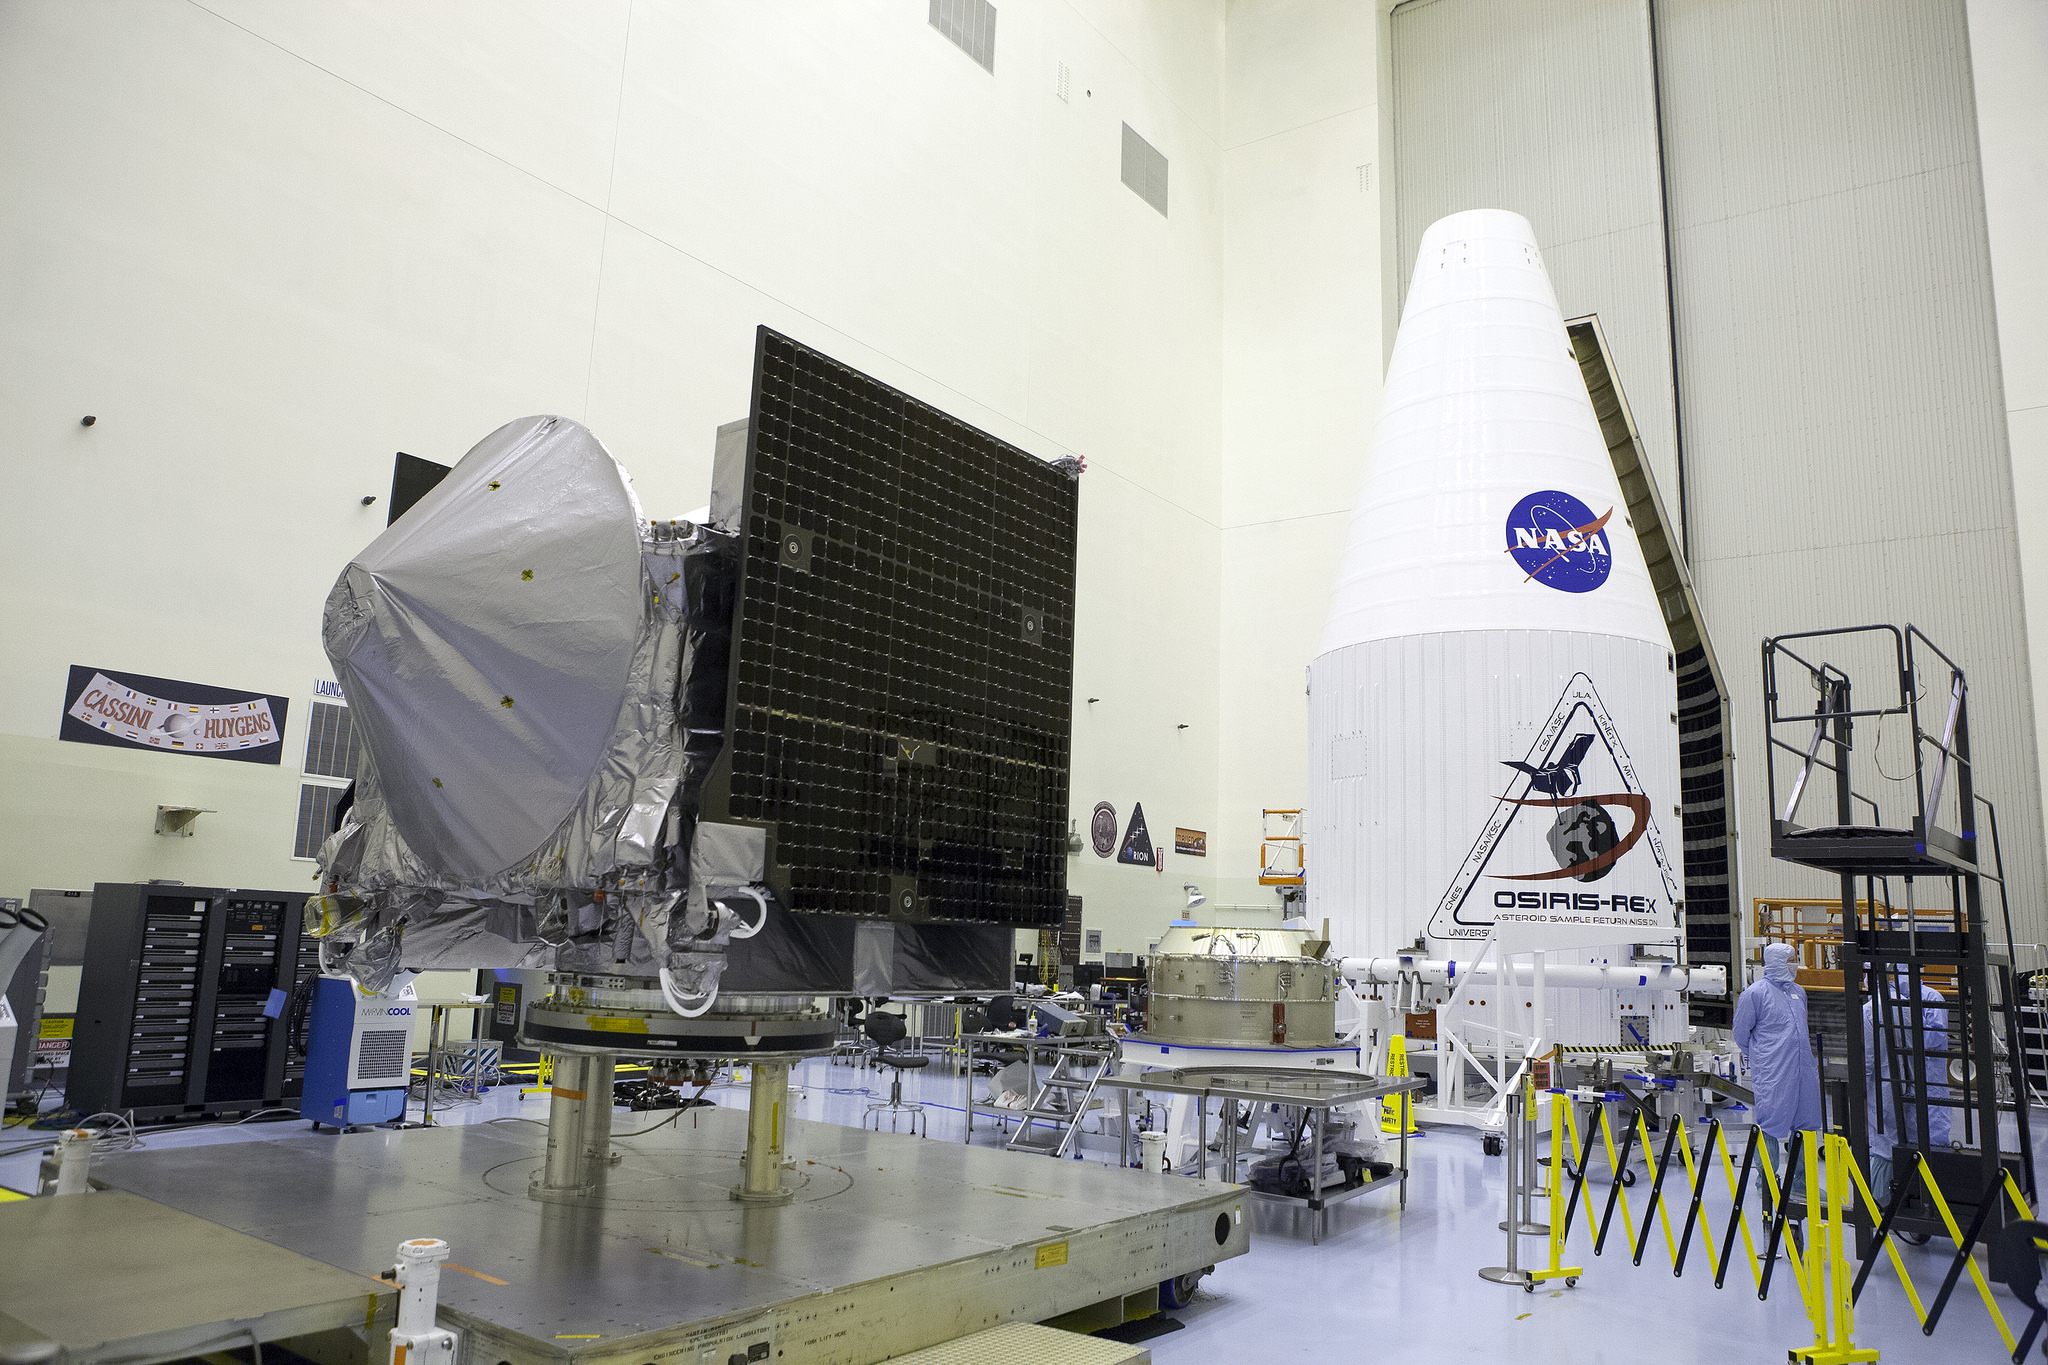 Inside the Payload Hazardous Servicing Facility at NASA's Kennedy Space Center in Florida, the agency’s OSIRIS-REx spacecraft is